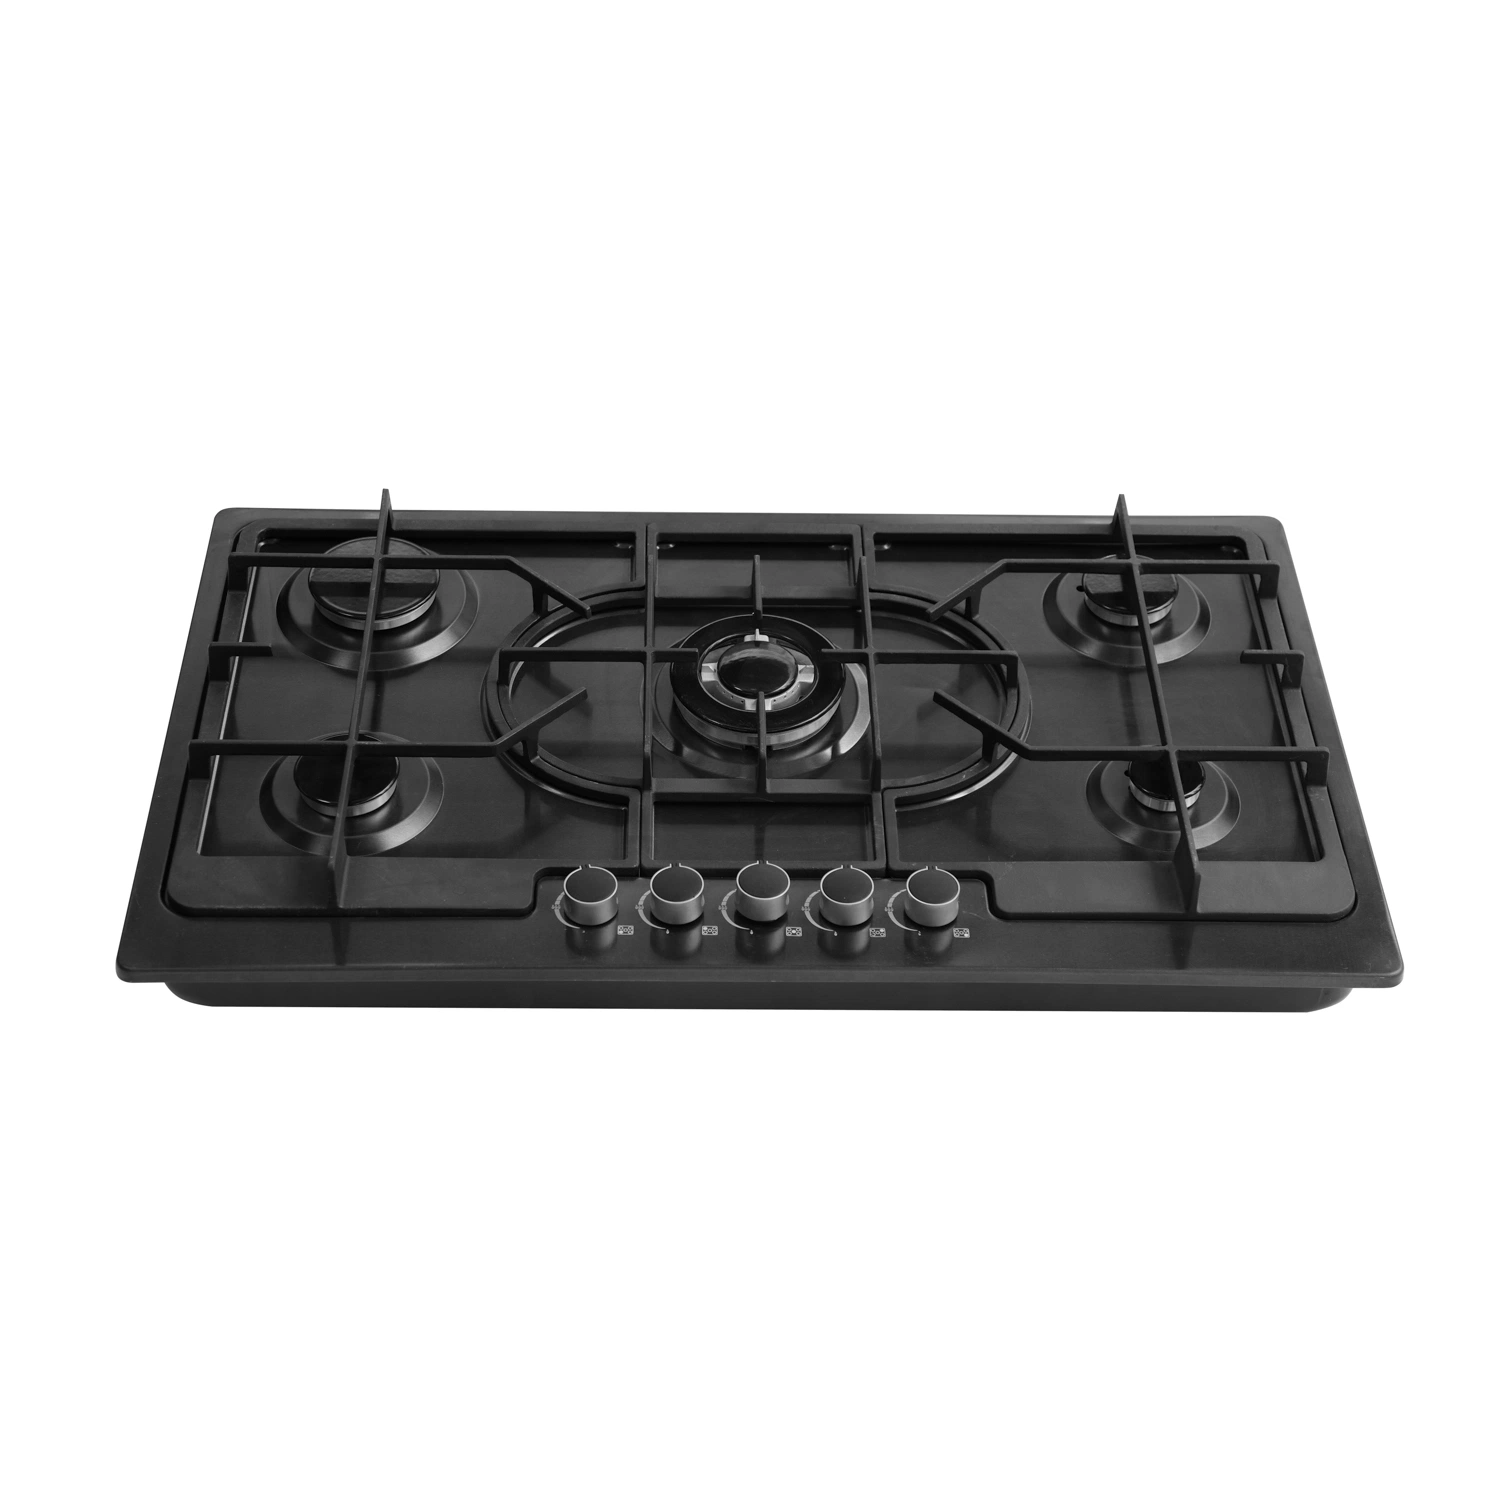 5 Burners Stainless Steel Built in Gas Cooktop Kitchen Appliance